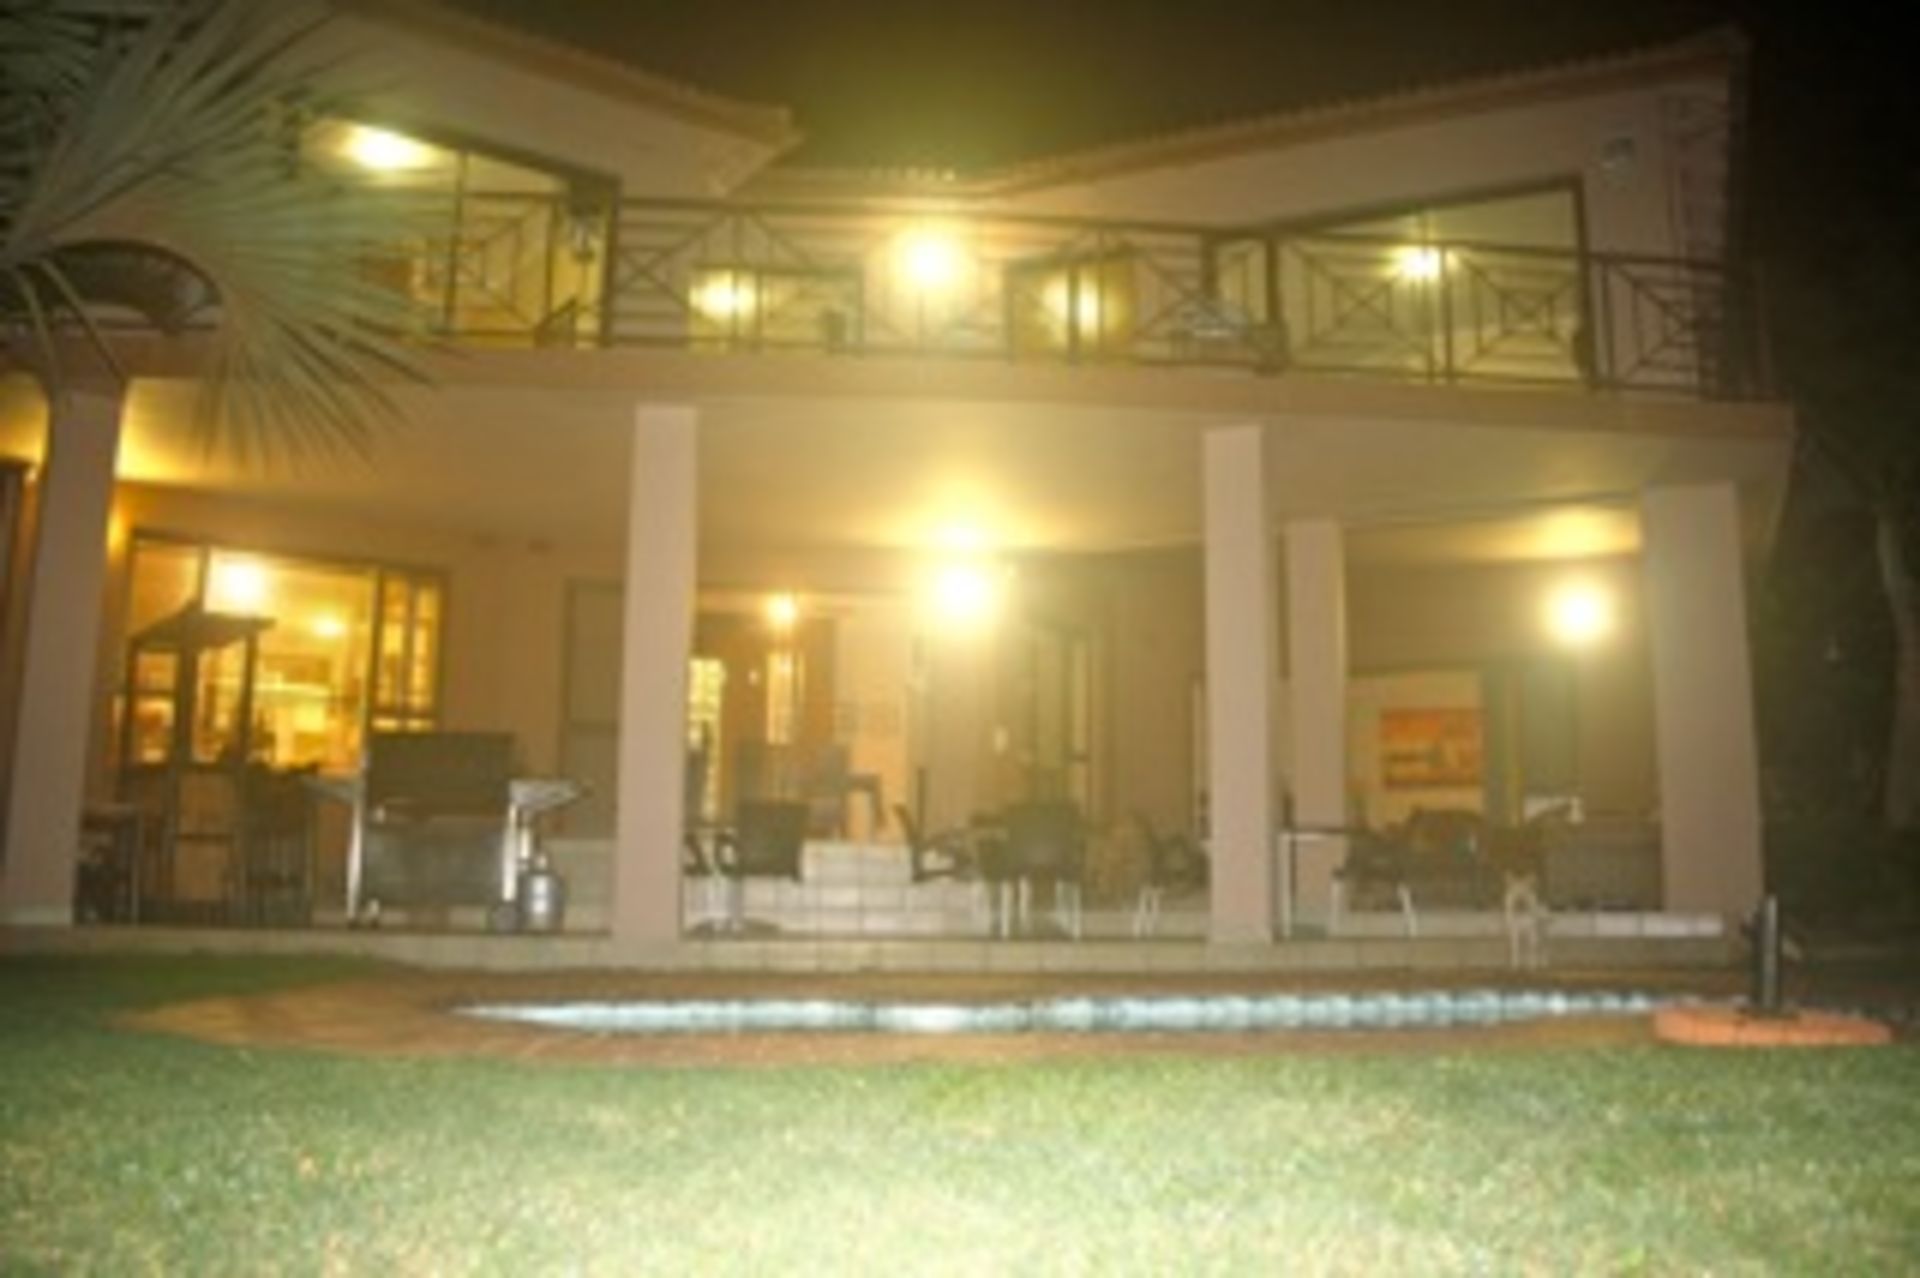 Zinkwazi Luxurious Family Home plus two flat-lets / 4 Star Guest House plus two flat-lets - Image 3 of 13